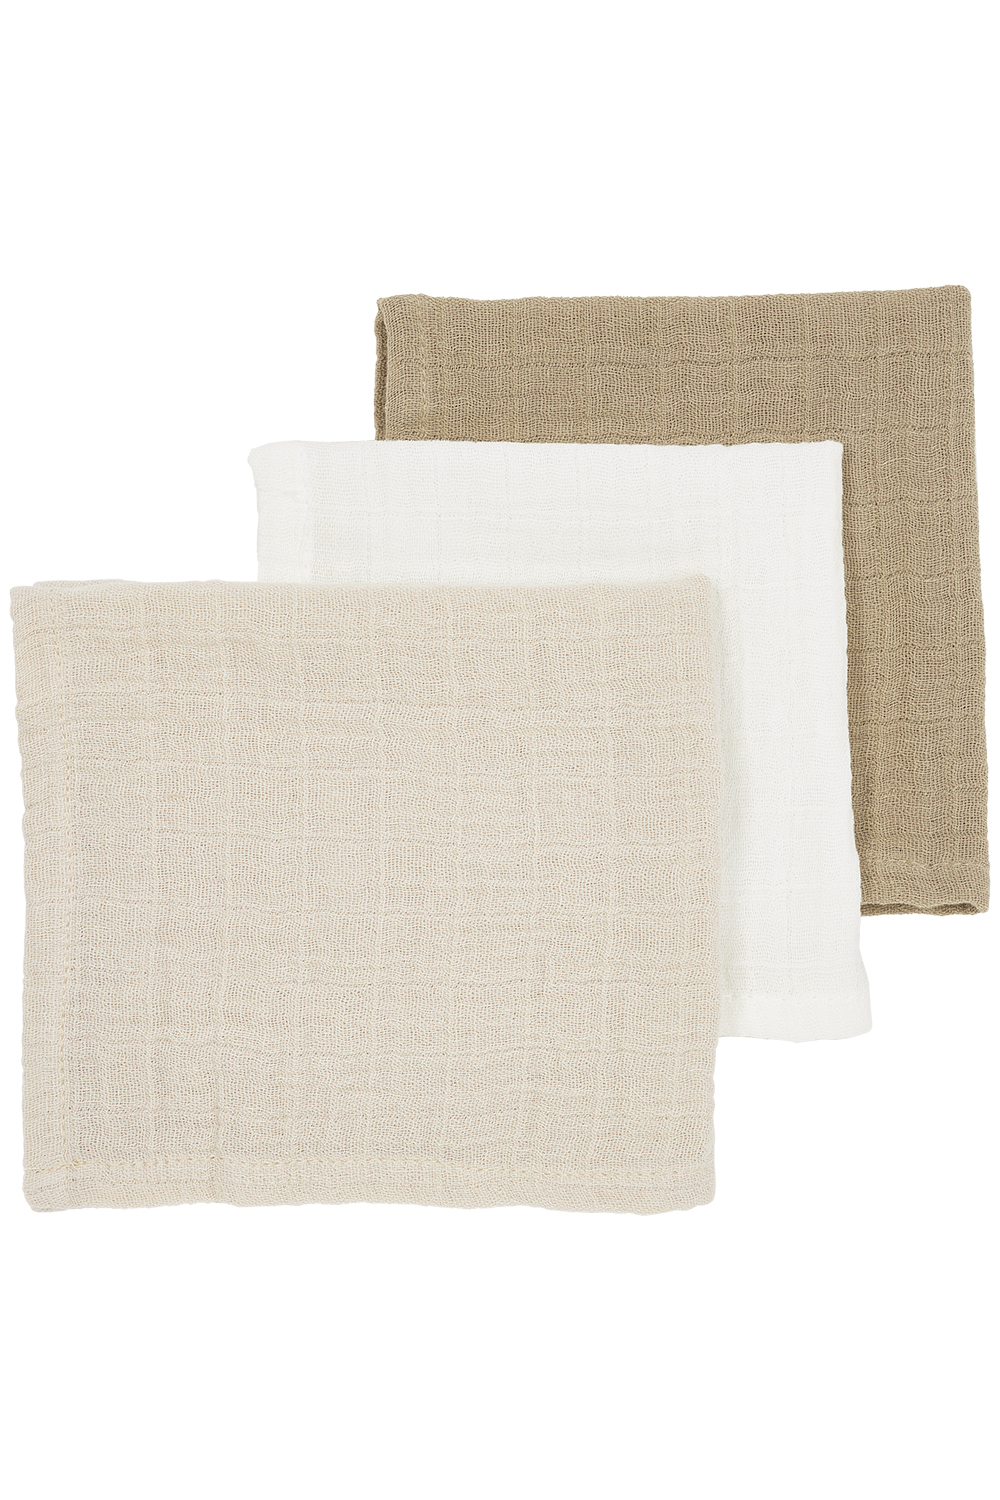 Facecloth 3-pack pre-washed muslin Uni - offwhite/soft sand/taupe - 30x30cm